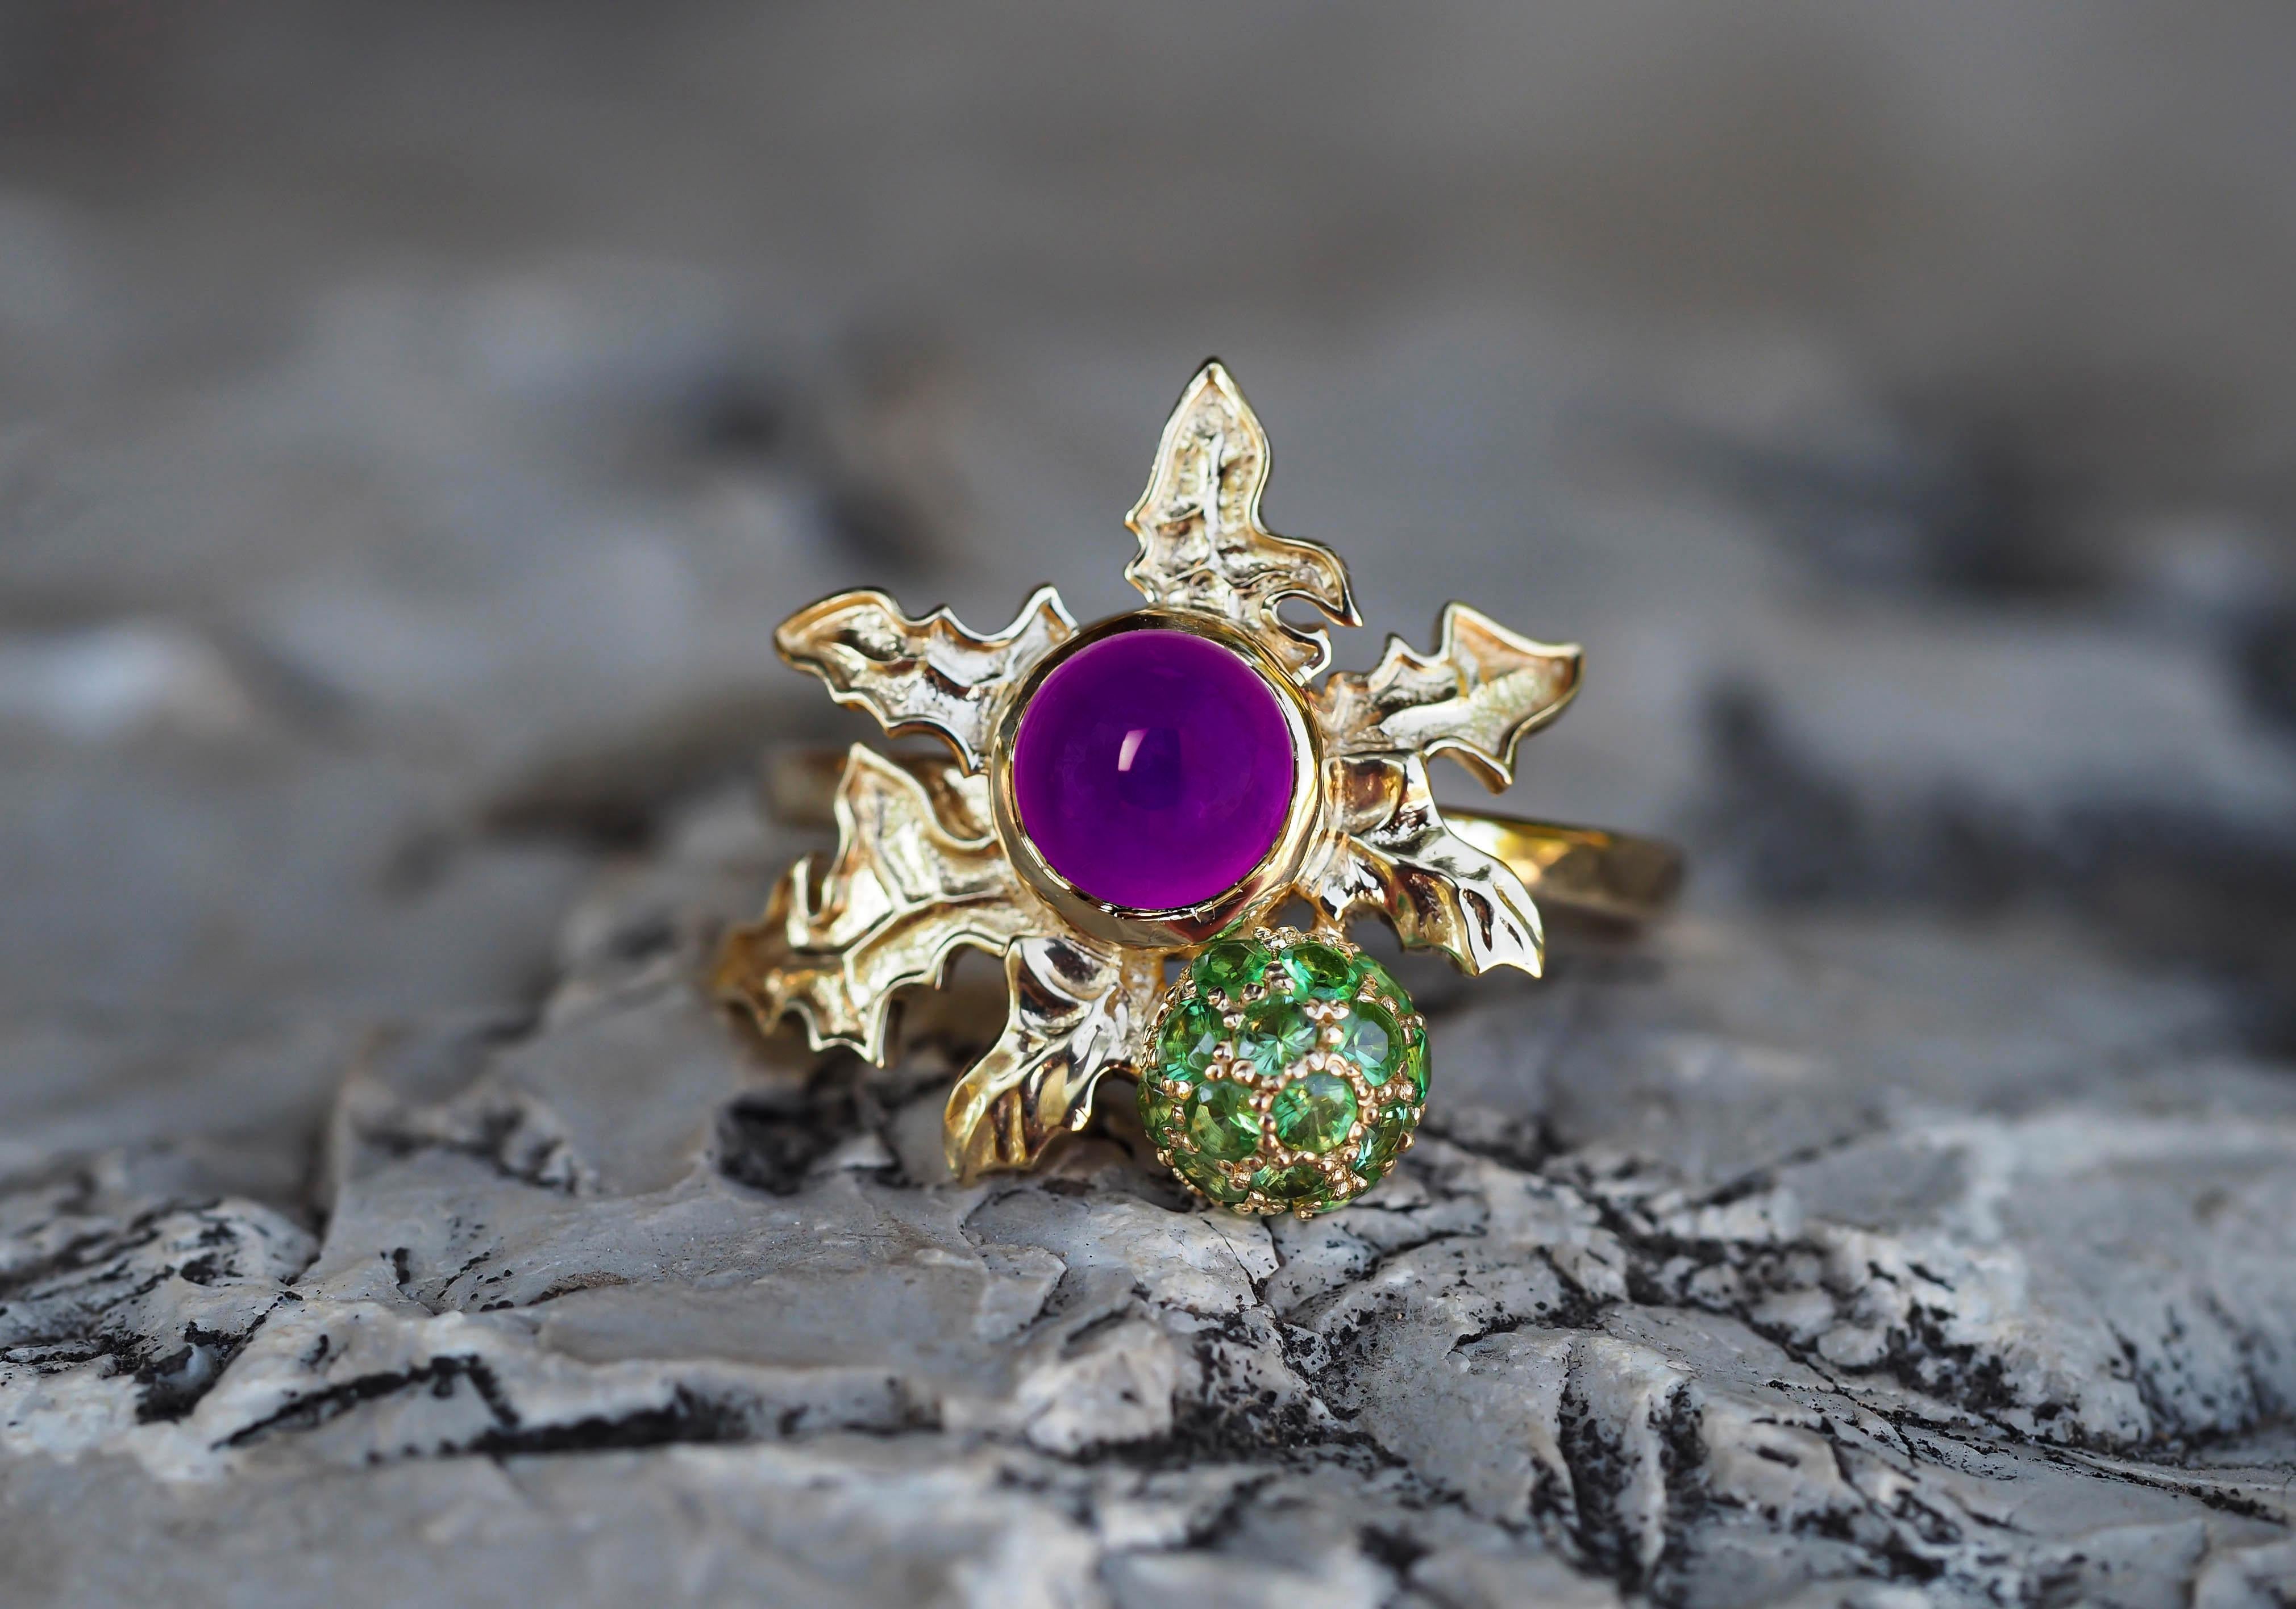 For Sale:  14 K Gold Scottish Thistle Ring with Amethyst and Peridots! 11